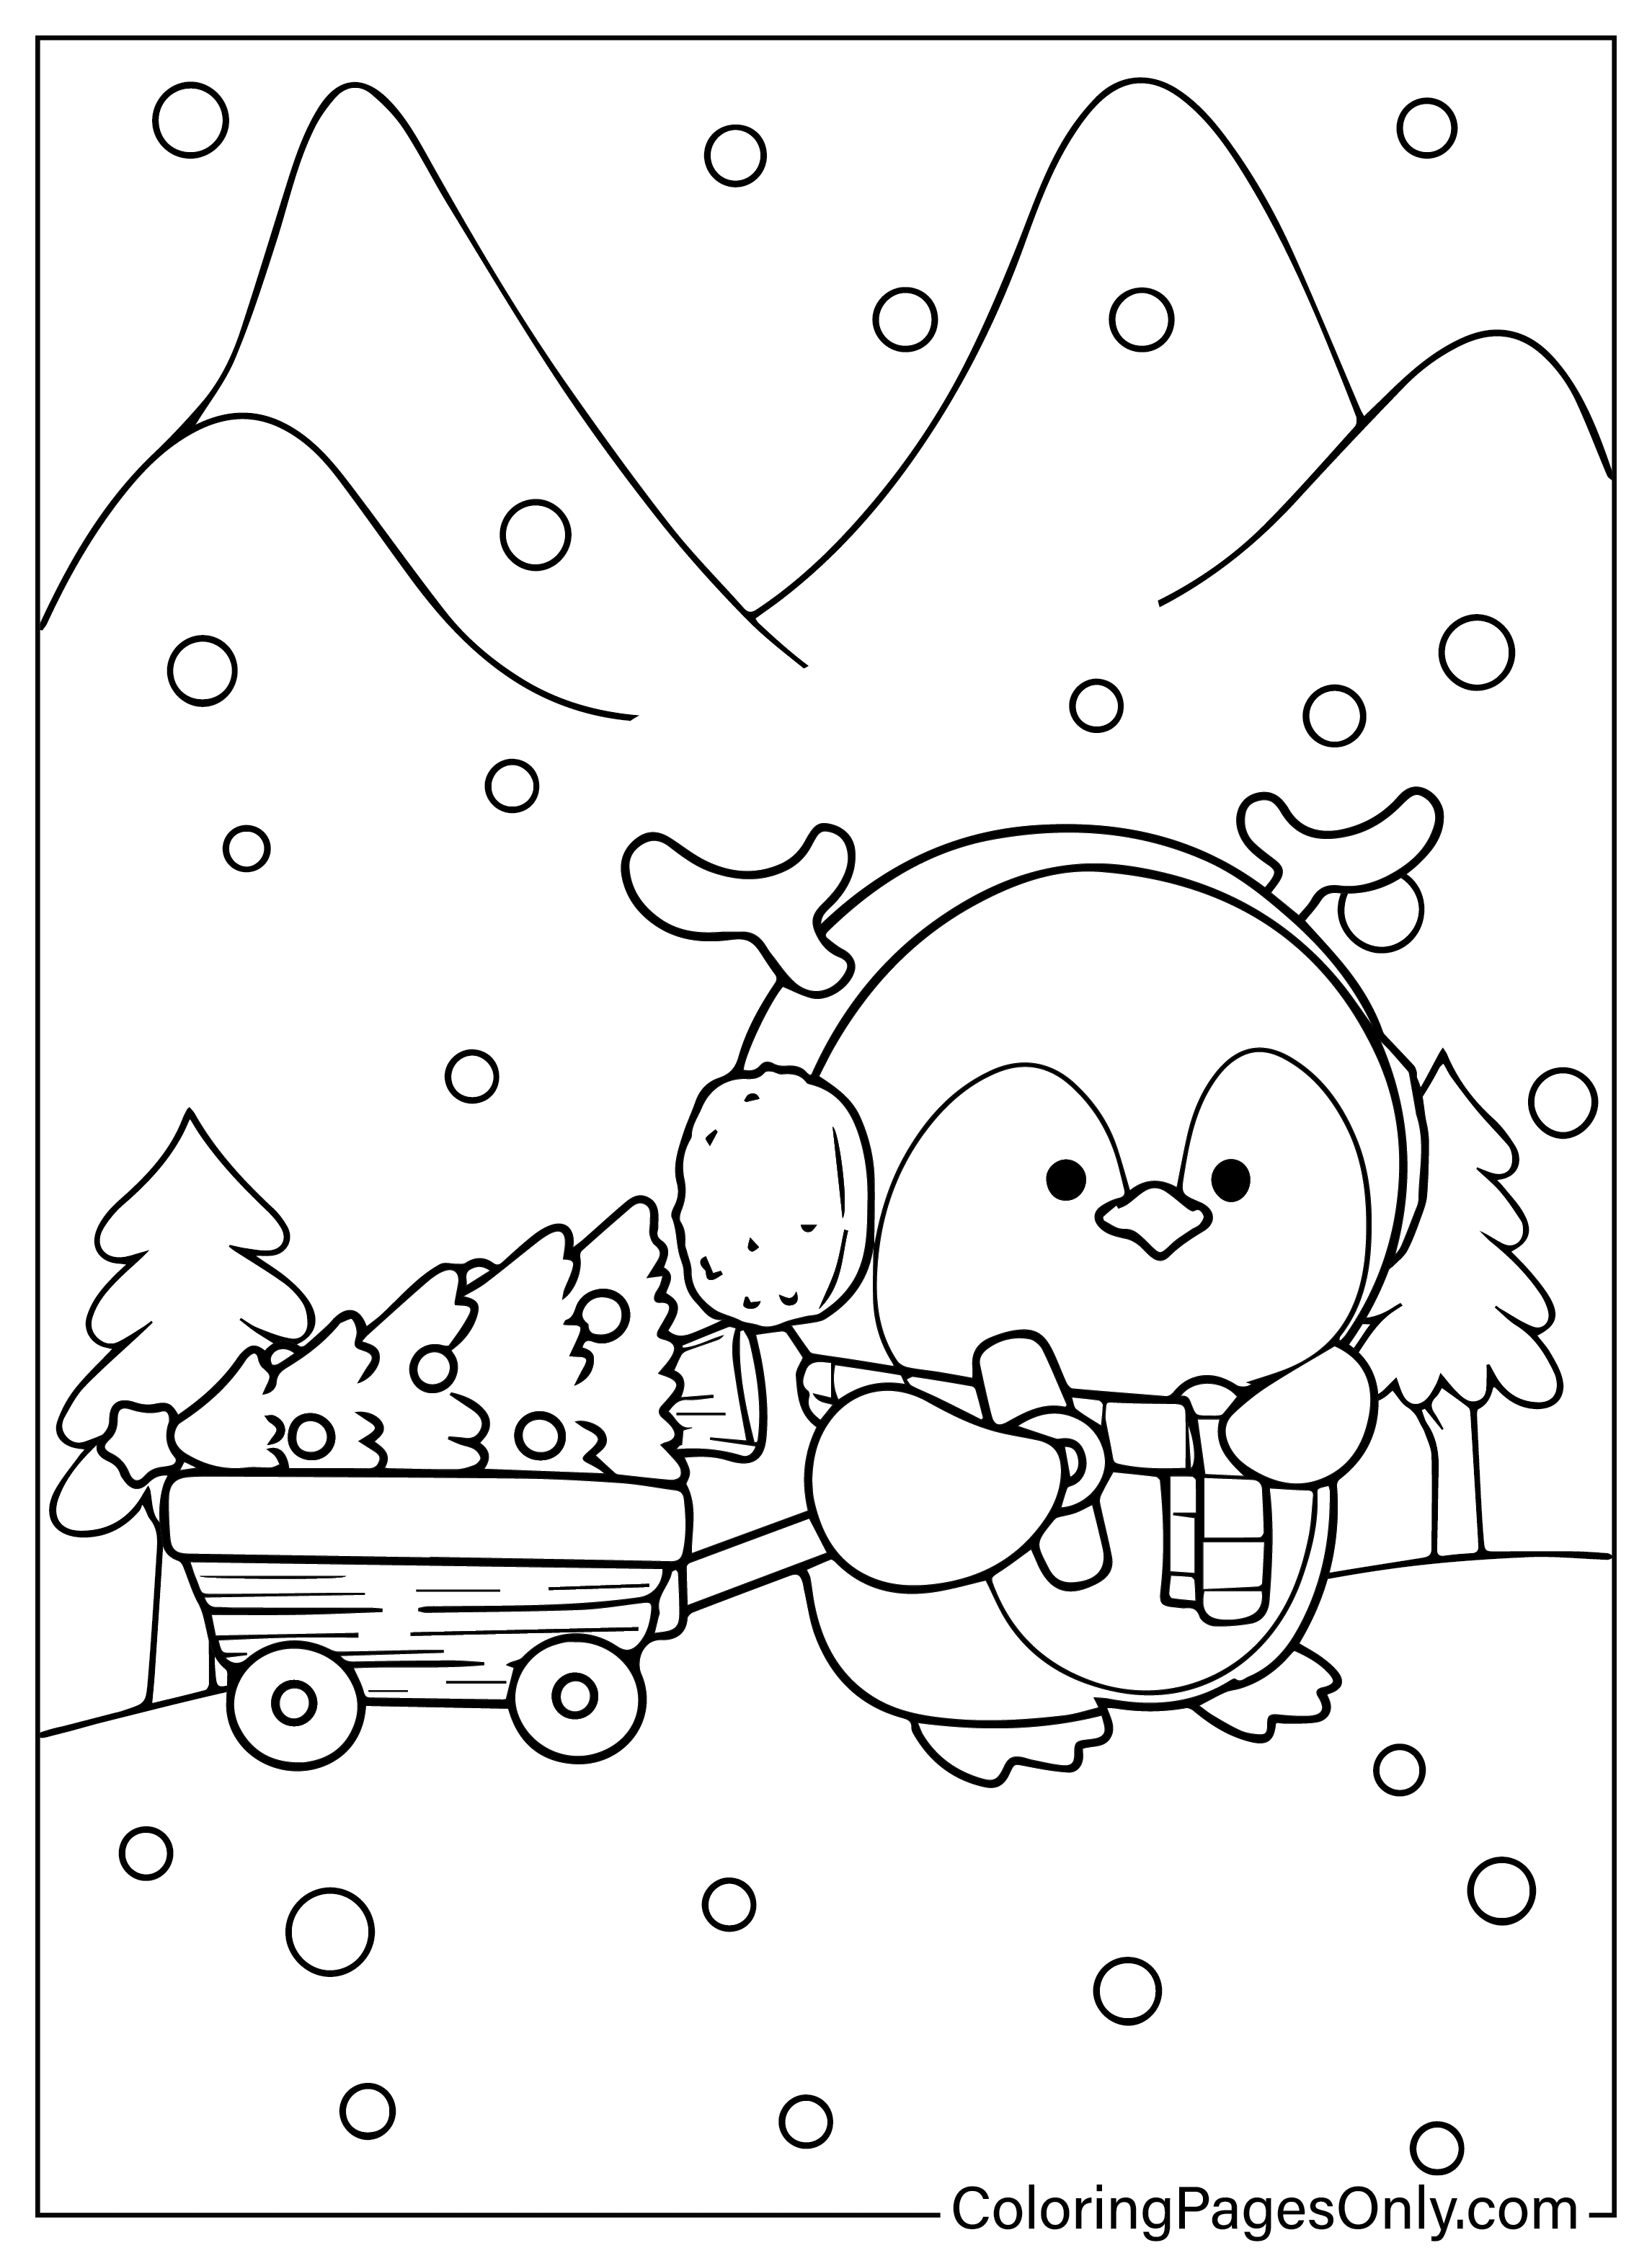 Printable Cute Christmas Coloring Page from Christmas Animals